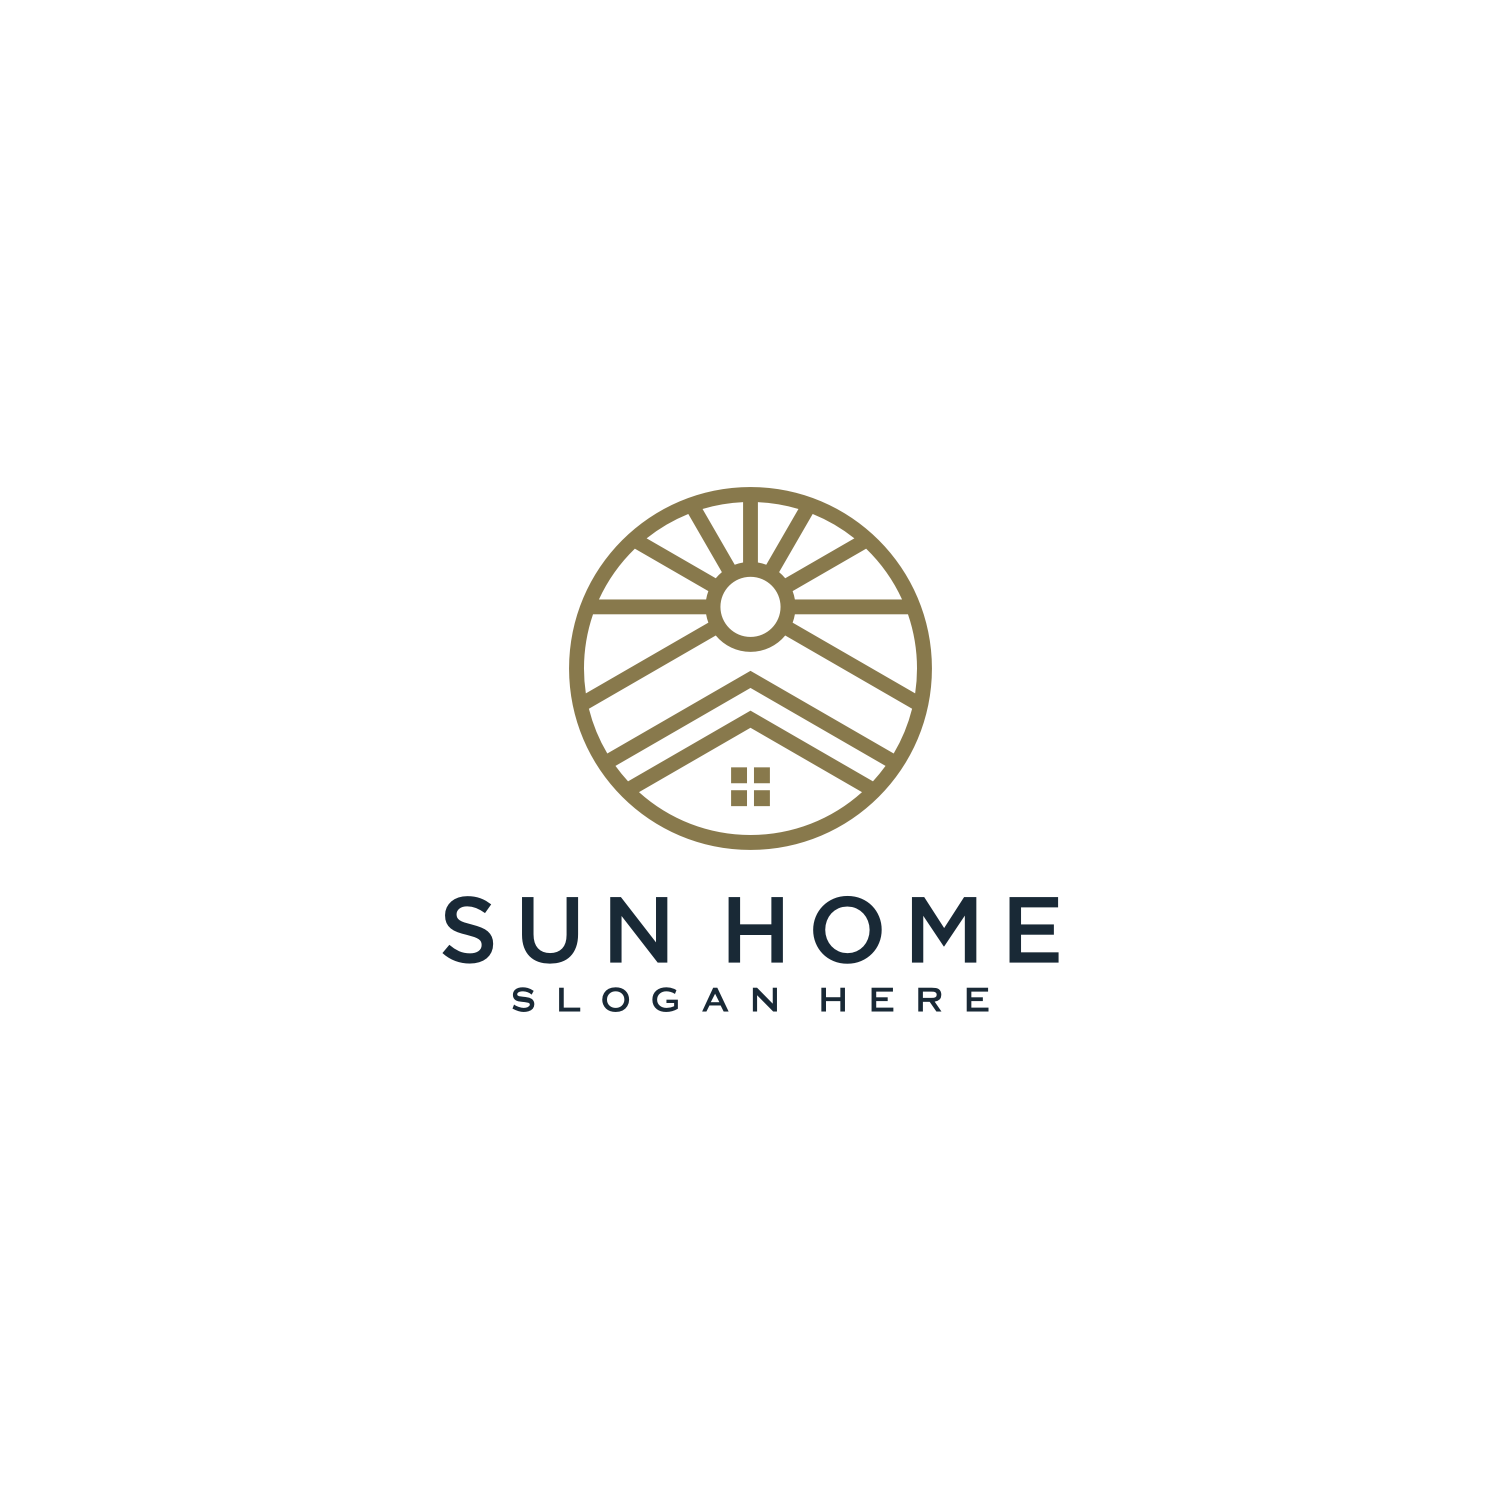 Minimalist Line Abstract Home with Sun Light Logo Design cover image.